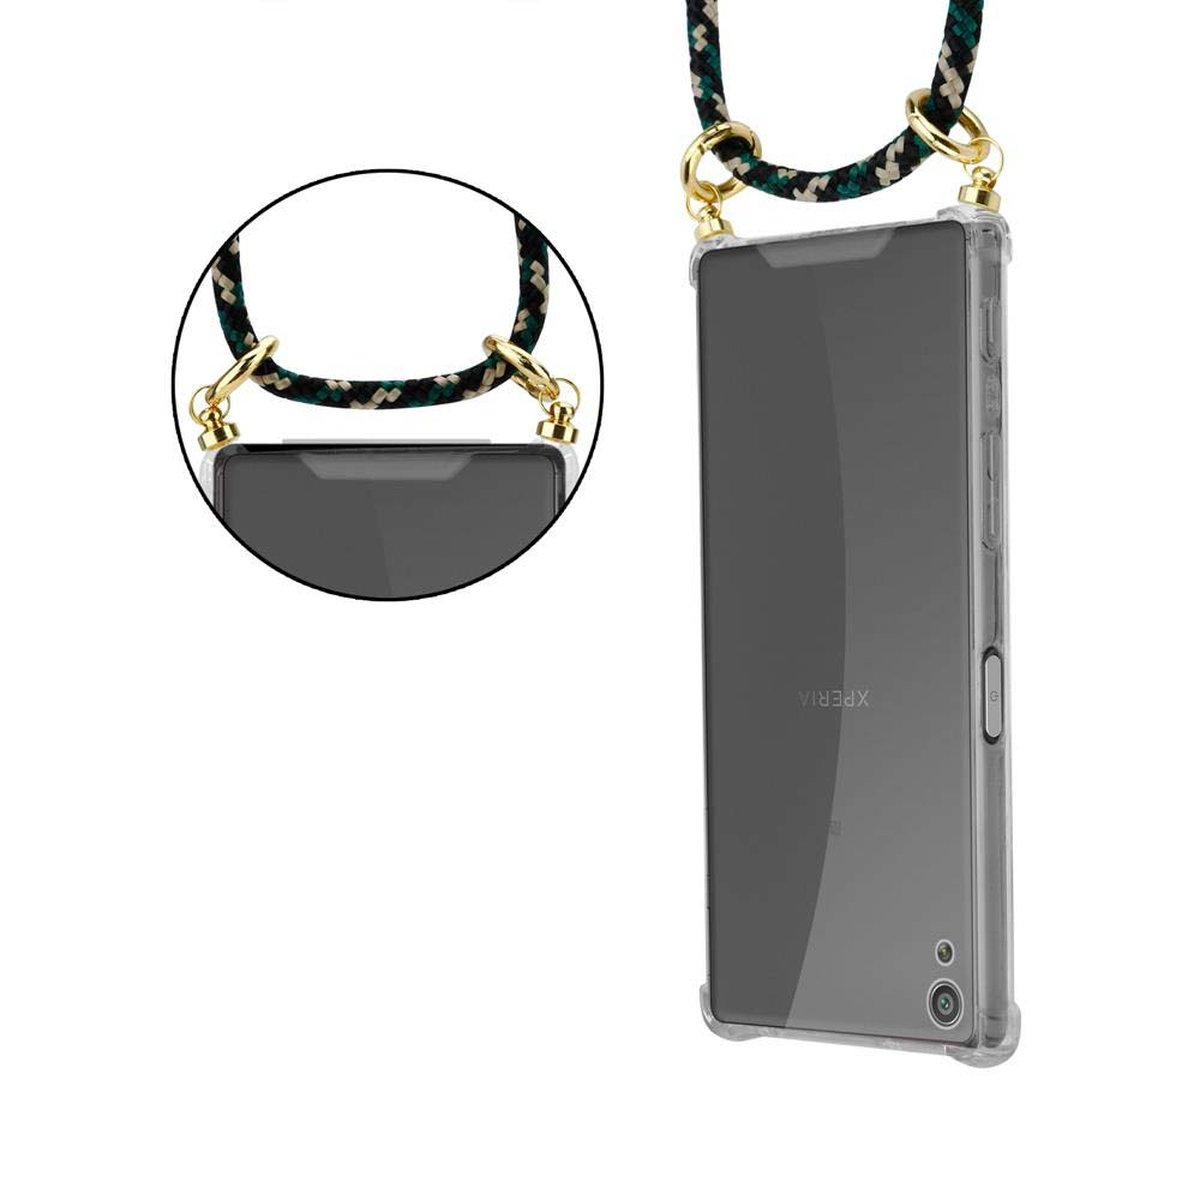 CADORABO Handy Kette mit Kordel XA, und Xperia Band Sony, Backcover, Gold Hülle, Ringen, CAMOUFLAGE abnehmbarer